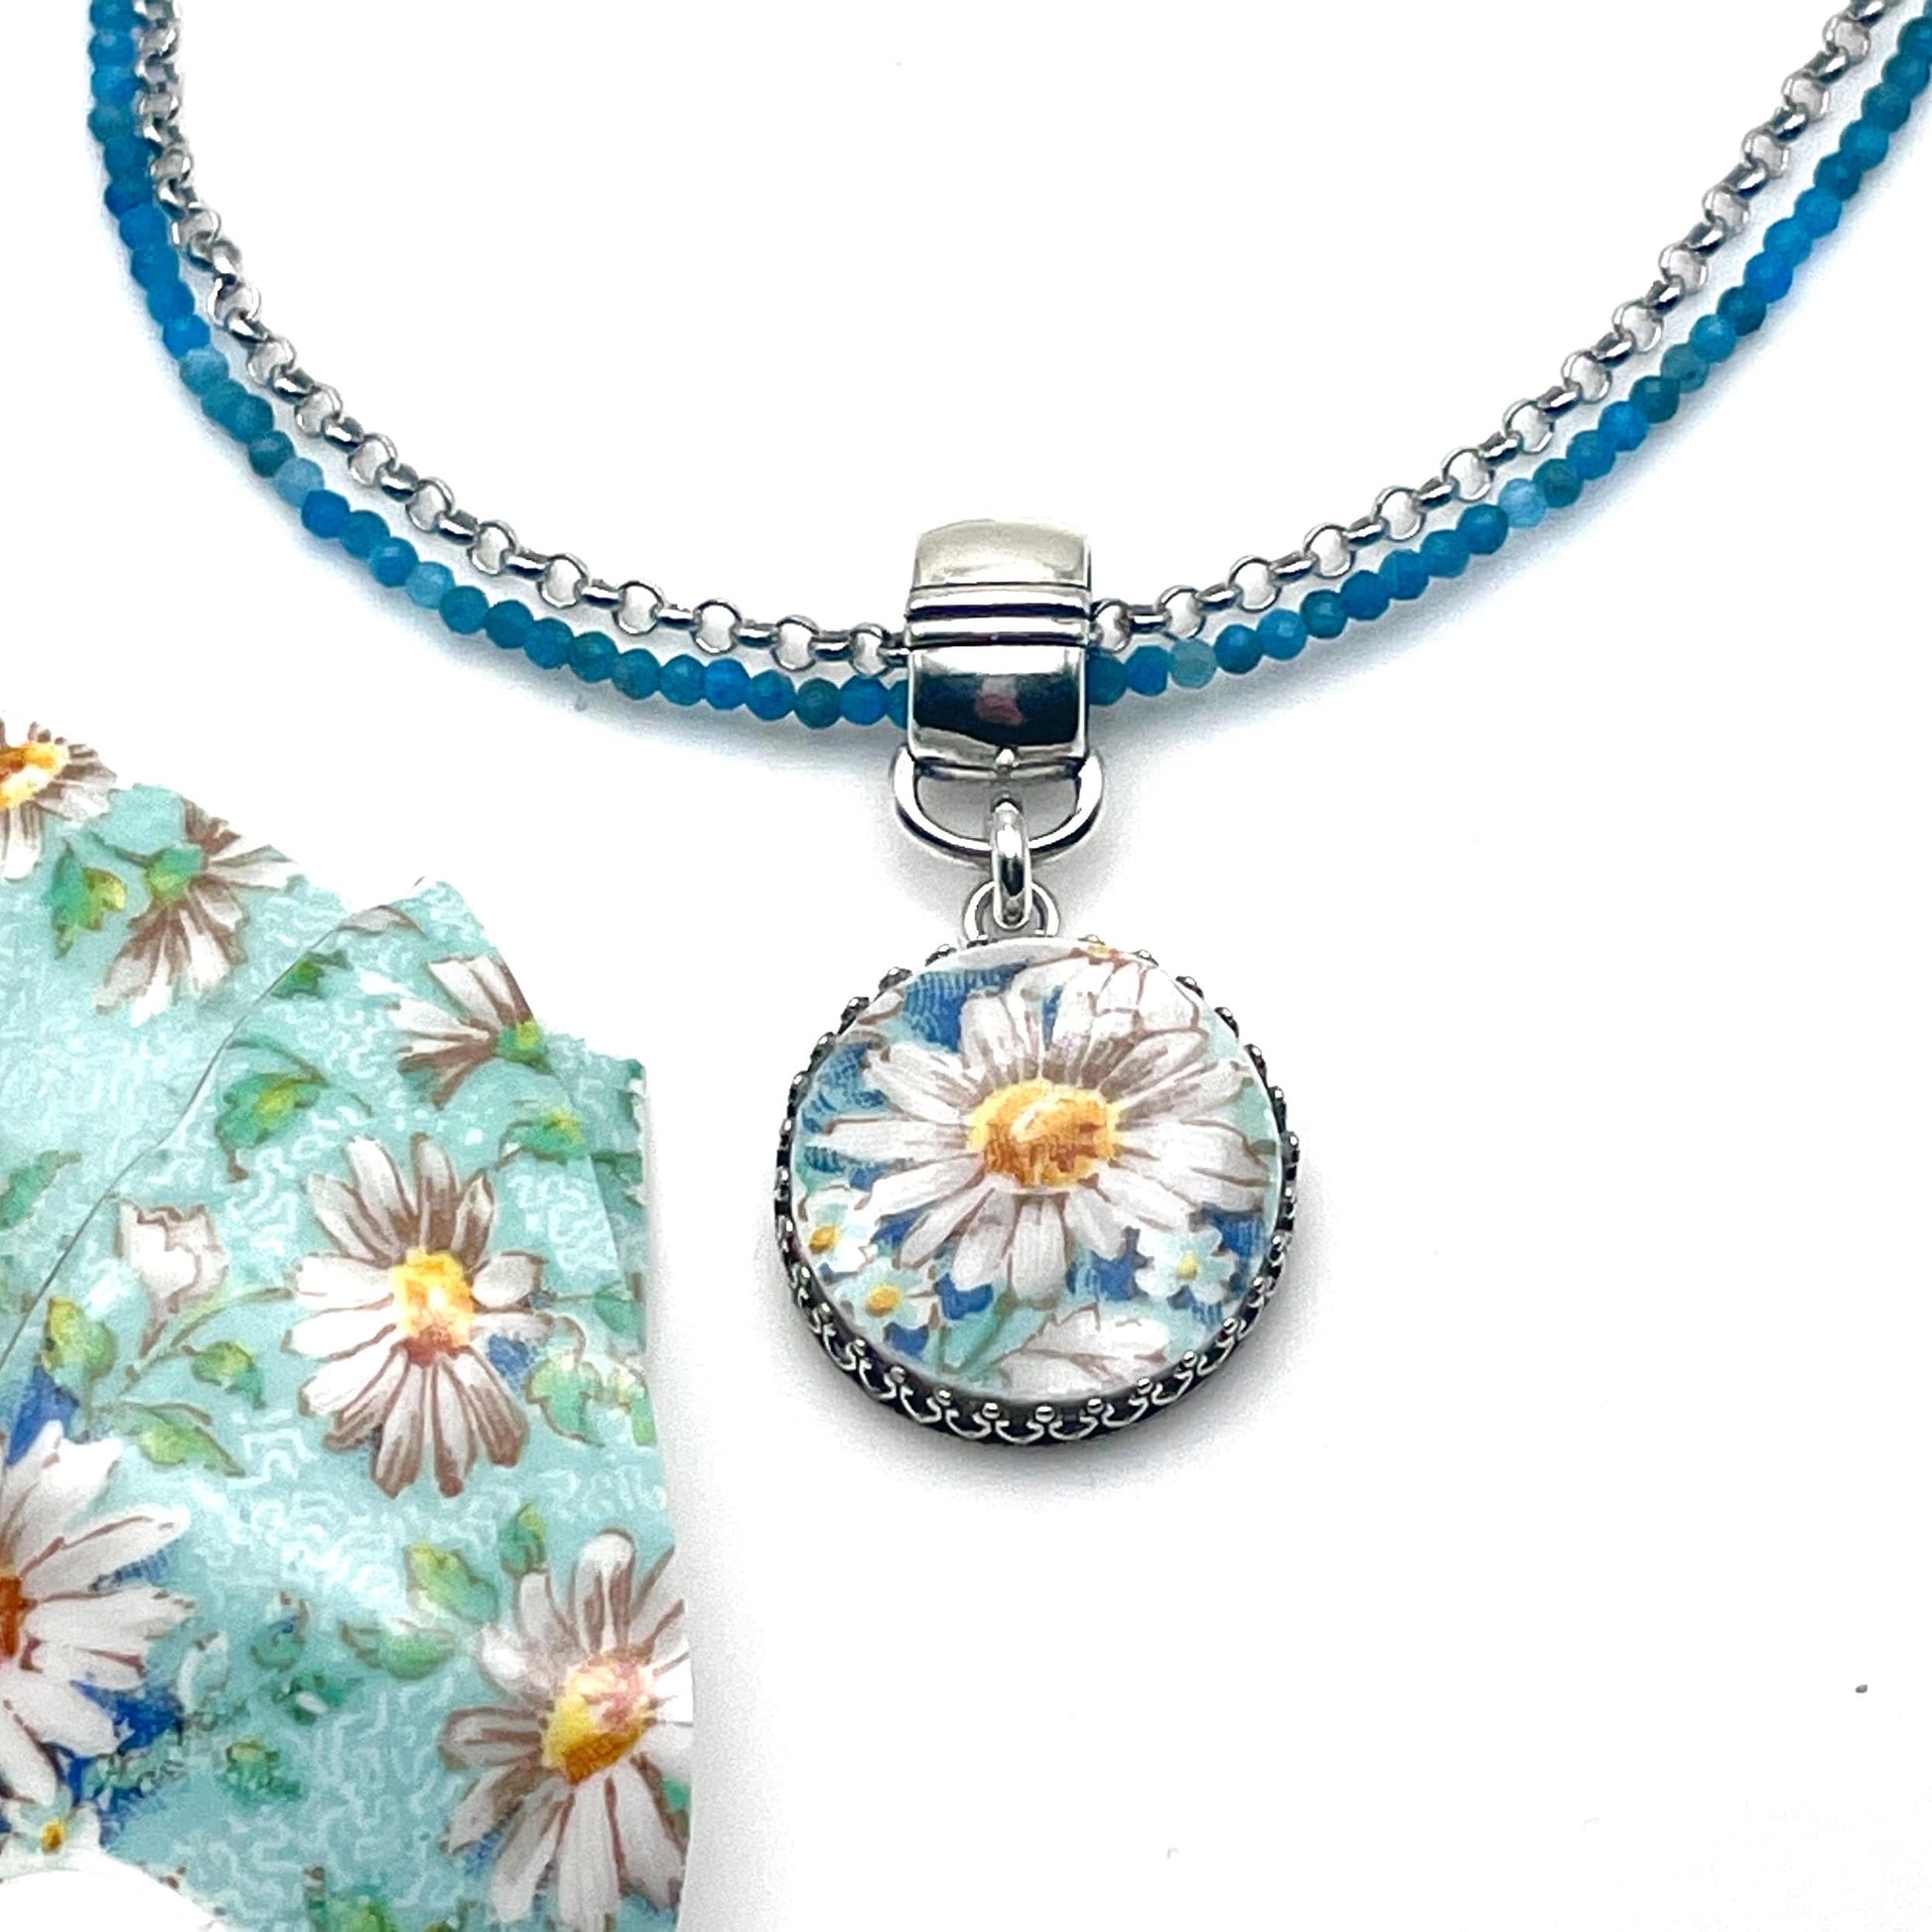 Sterling Silver Daisy Necklace, Broken China Jewelry, Summer Jewelry, 20th Anniversary Gift for Wife, Gemstone Necklace